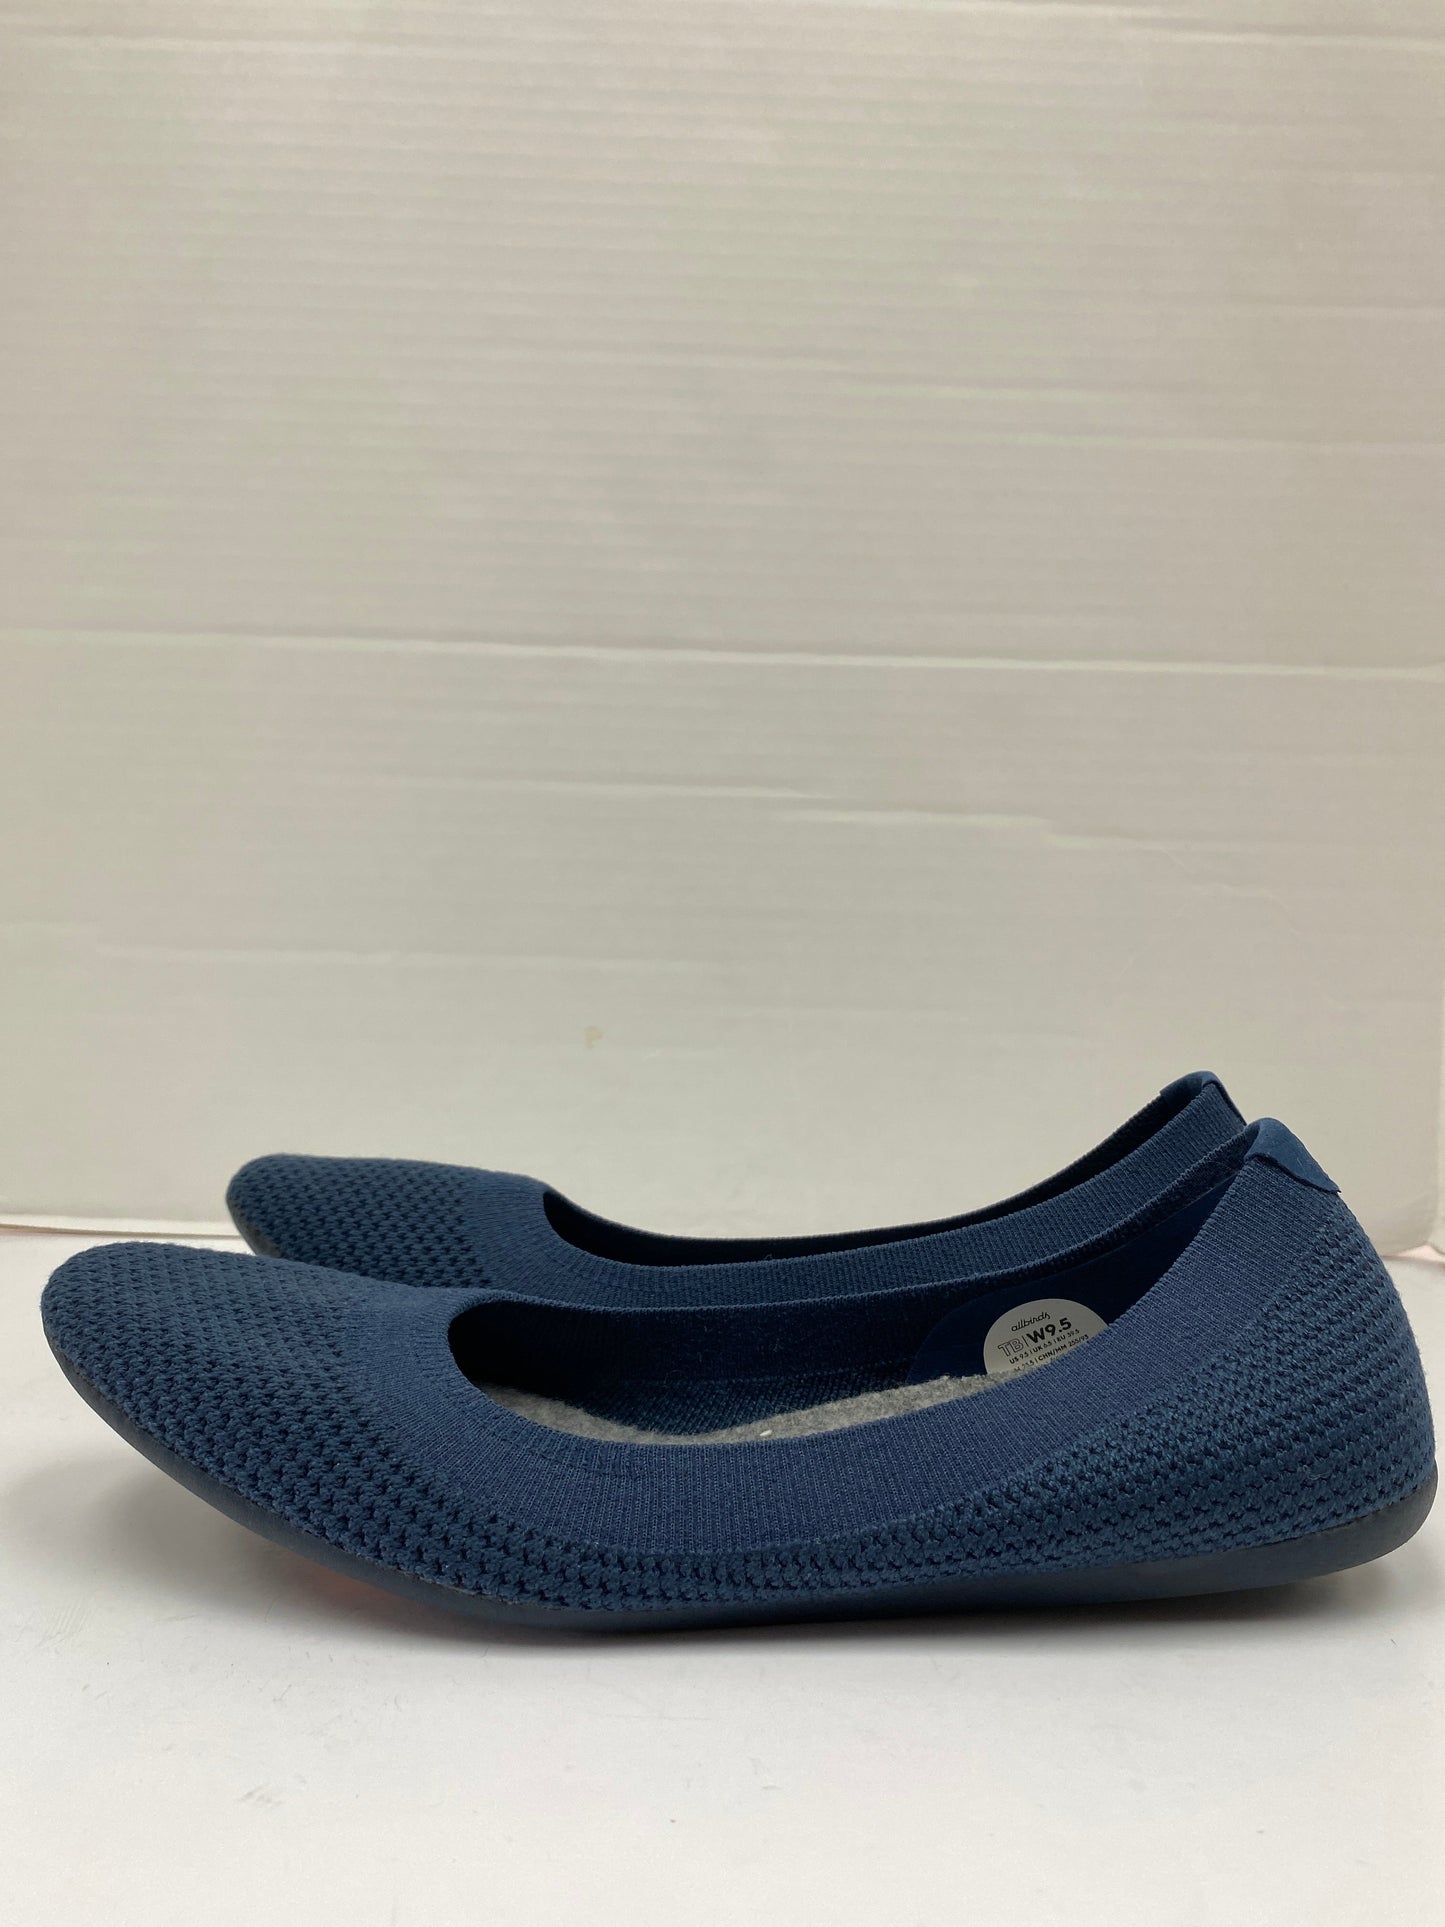 Shoes Flats By Allbirds  Size: 9.5